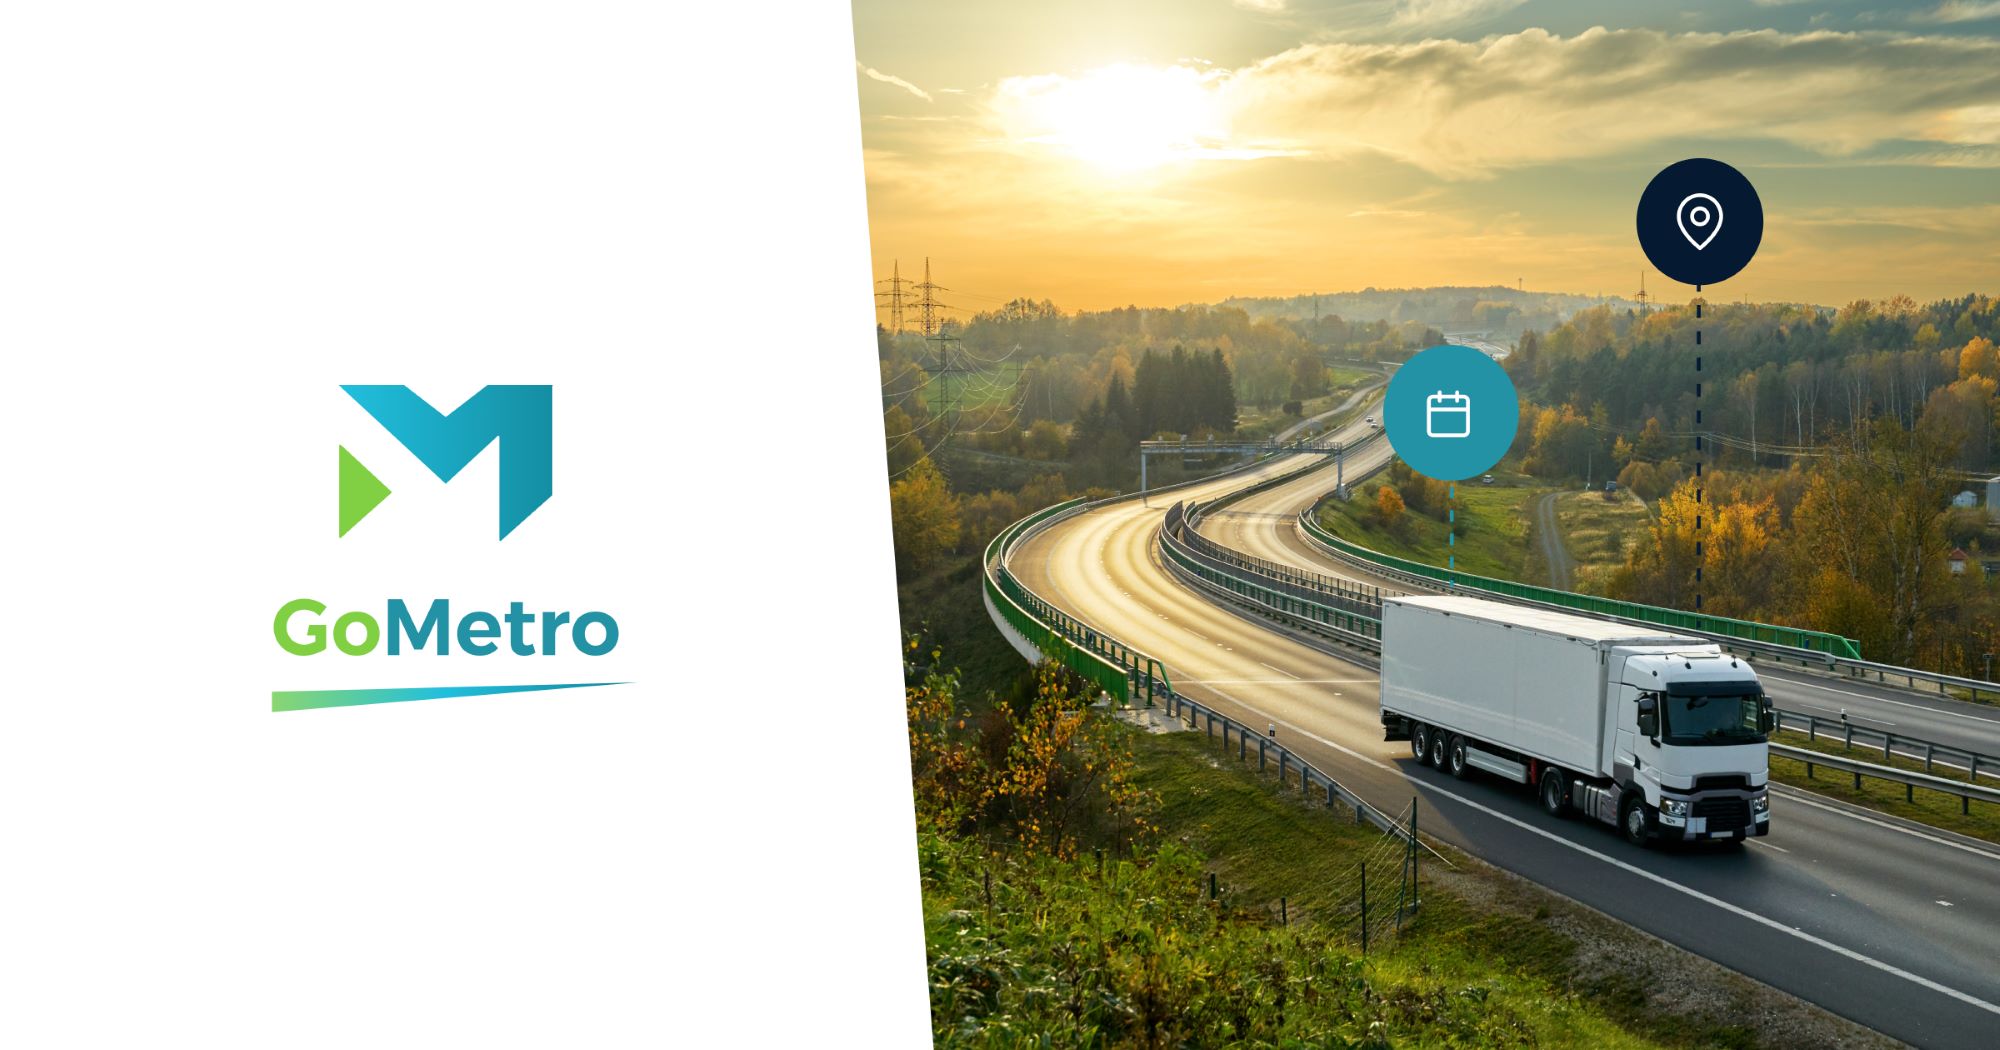 GoMetro Secures £9M In Funding For Fleet Management Optimization Software